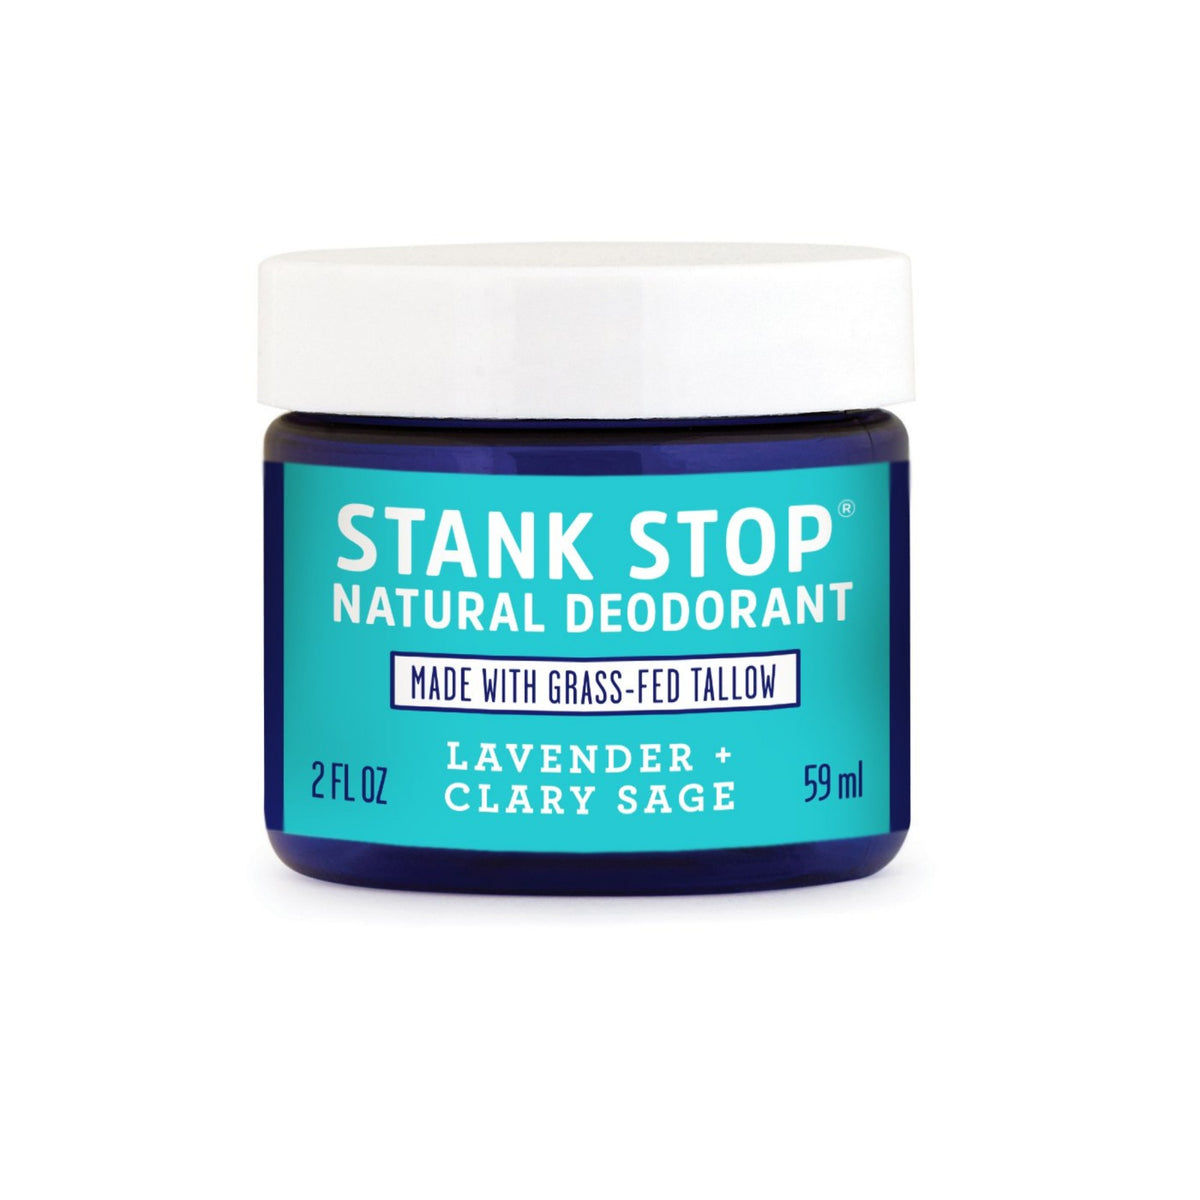 Stank Stop Cream Deodorant, Lavender + Sage 2oz by FATCO Skincare Products